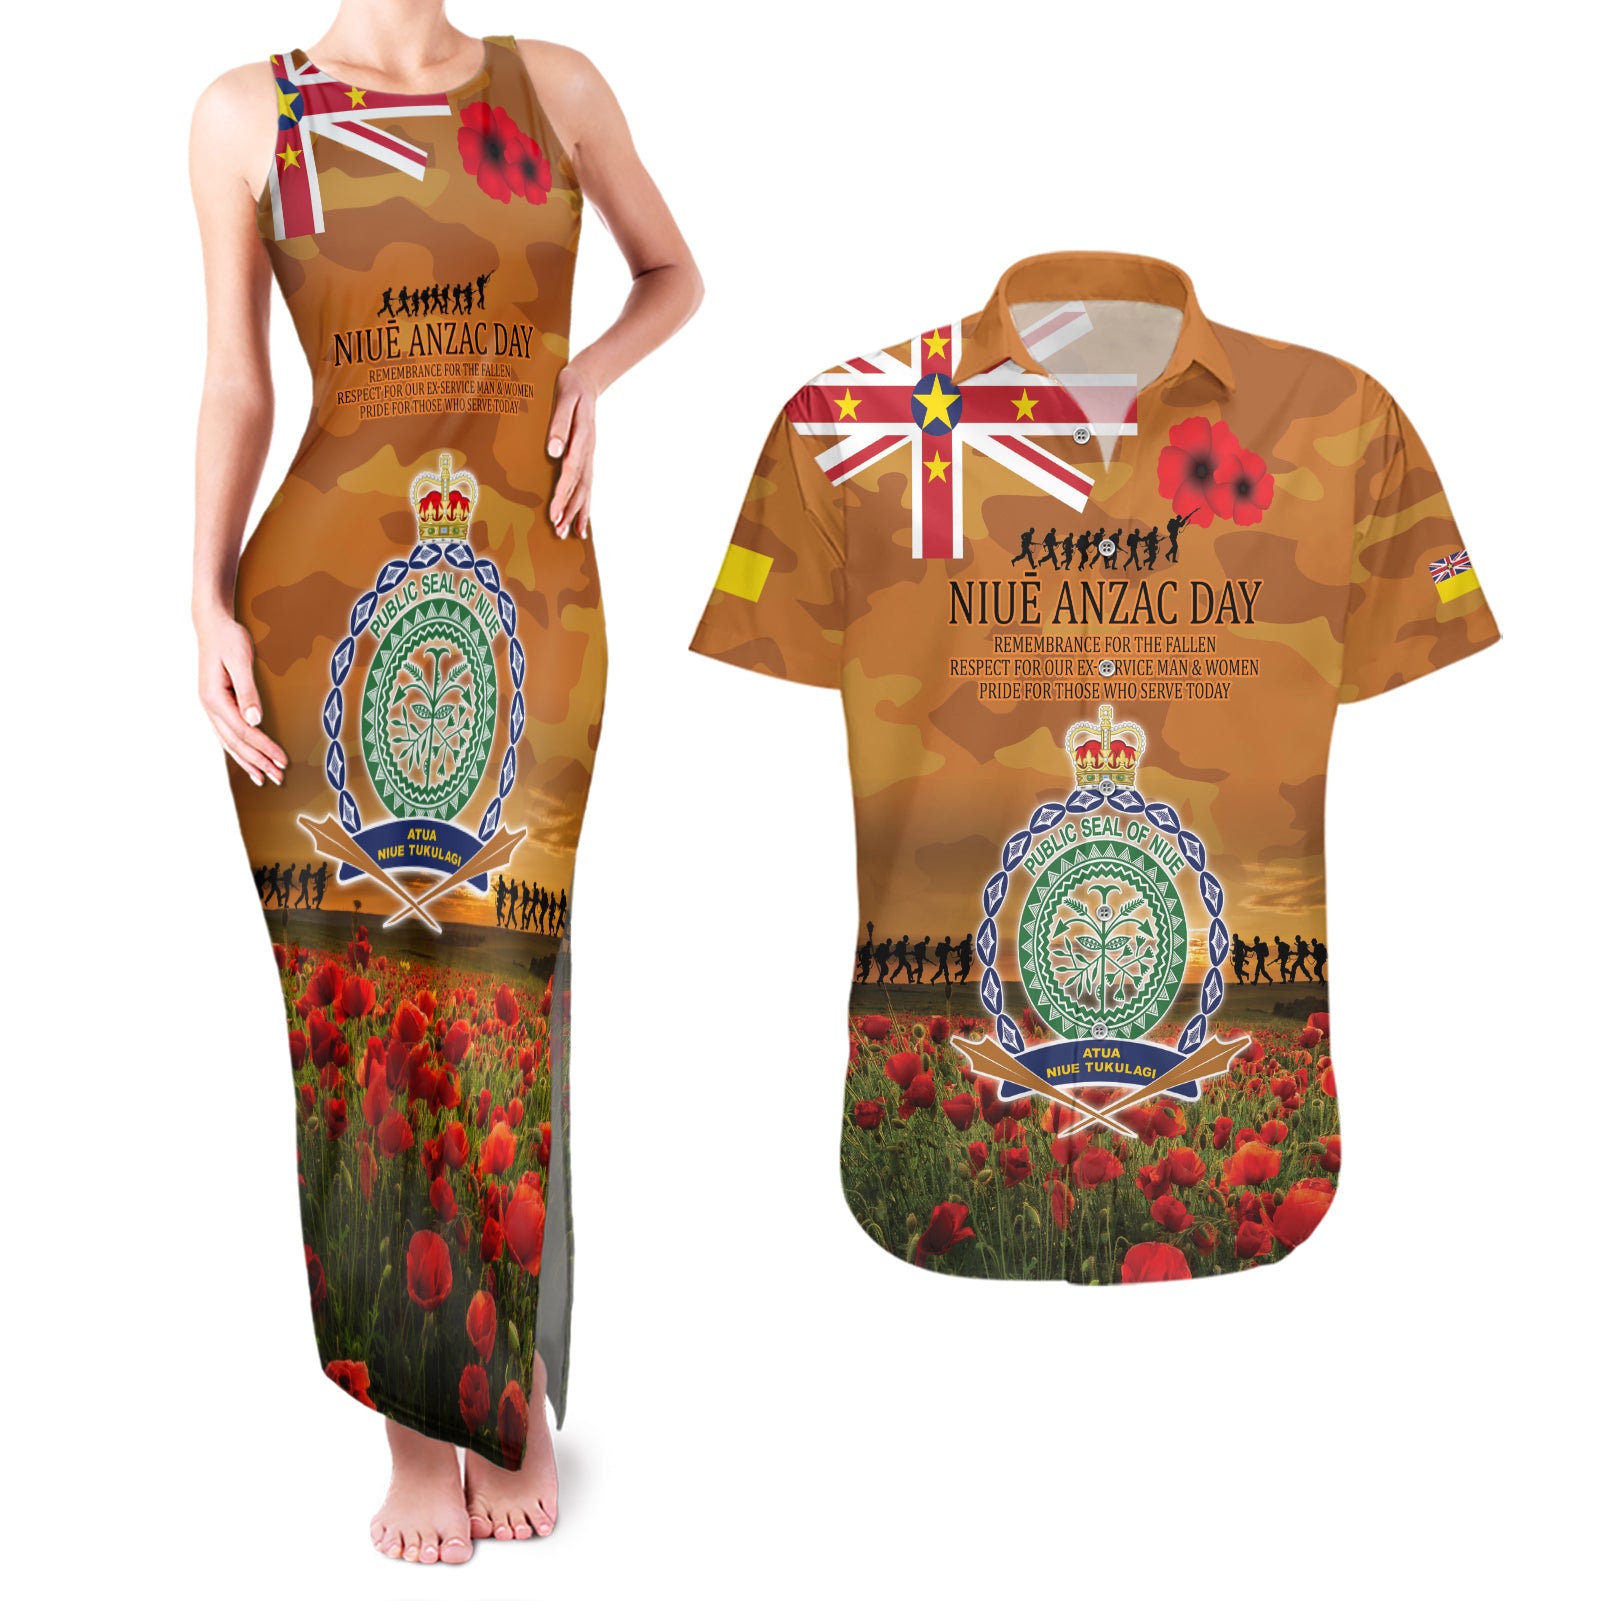 Niue ANZAC Day Personalised Couples Matching Tank Maxi Dress and Hawaiian Shirt with Poppy Field LT9 Art - Polynesian Pride